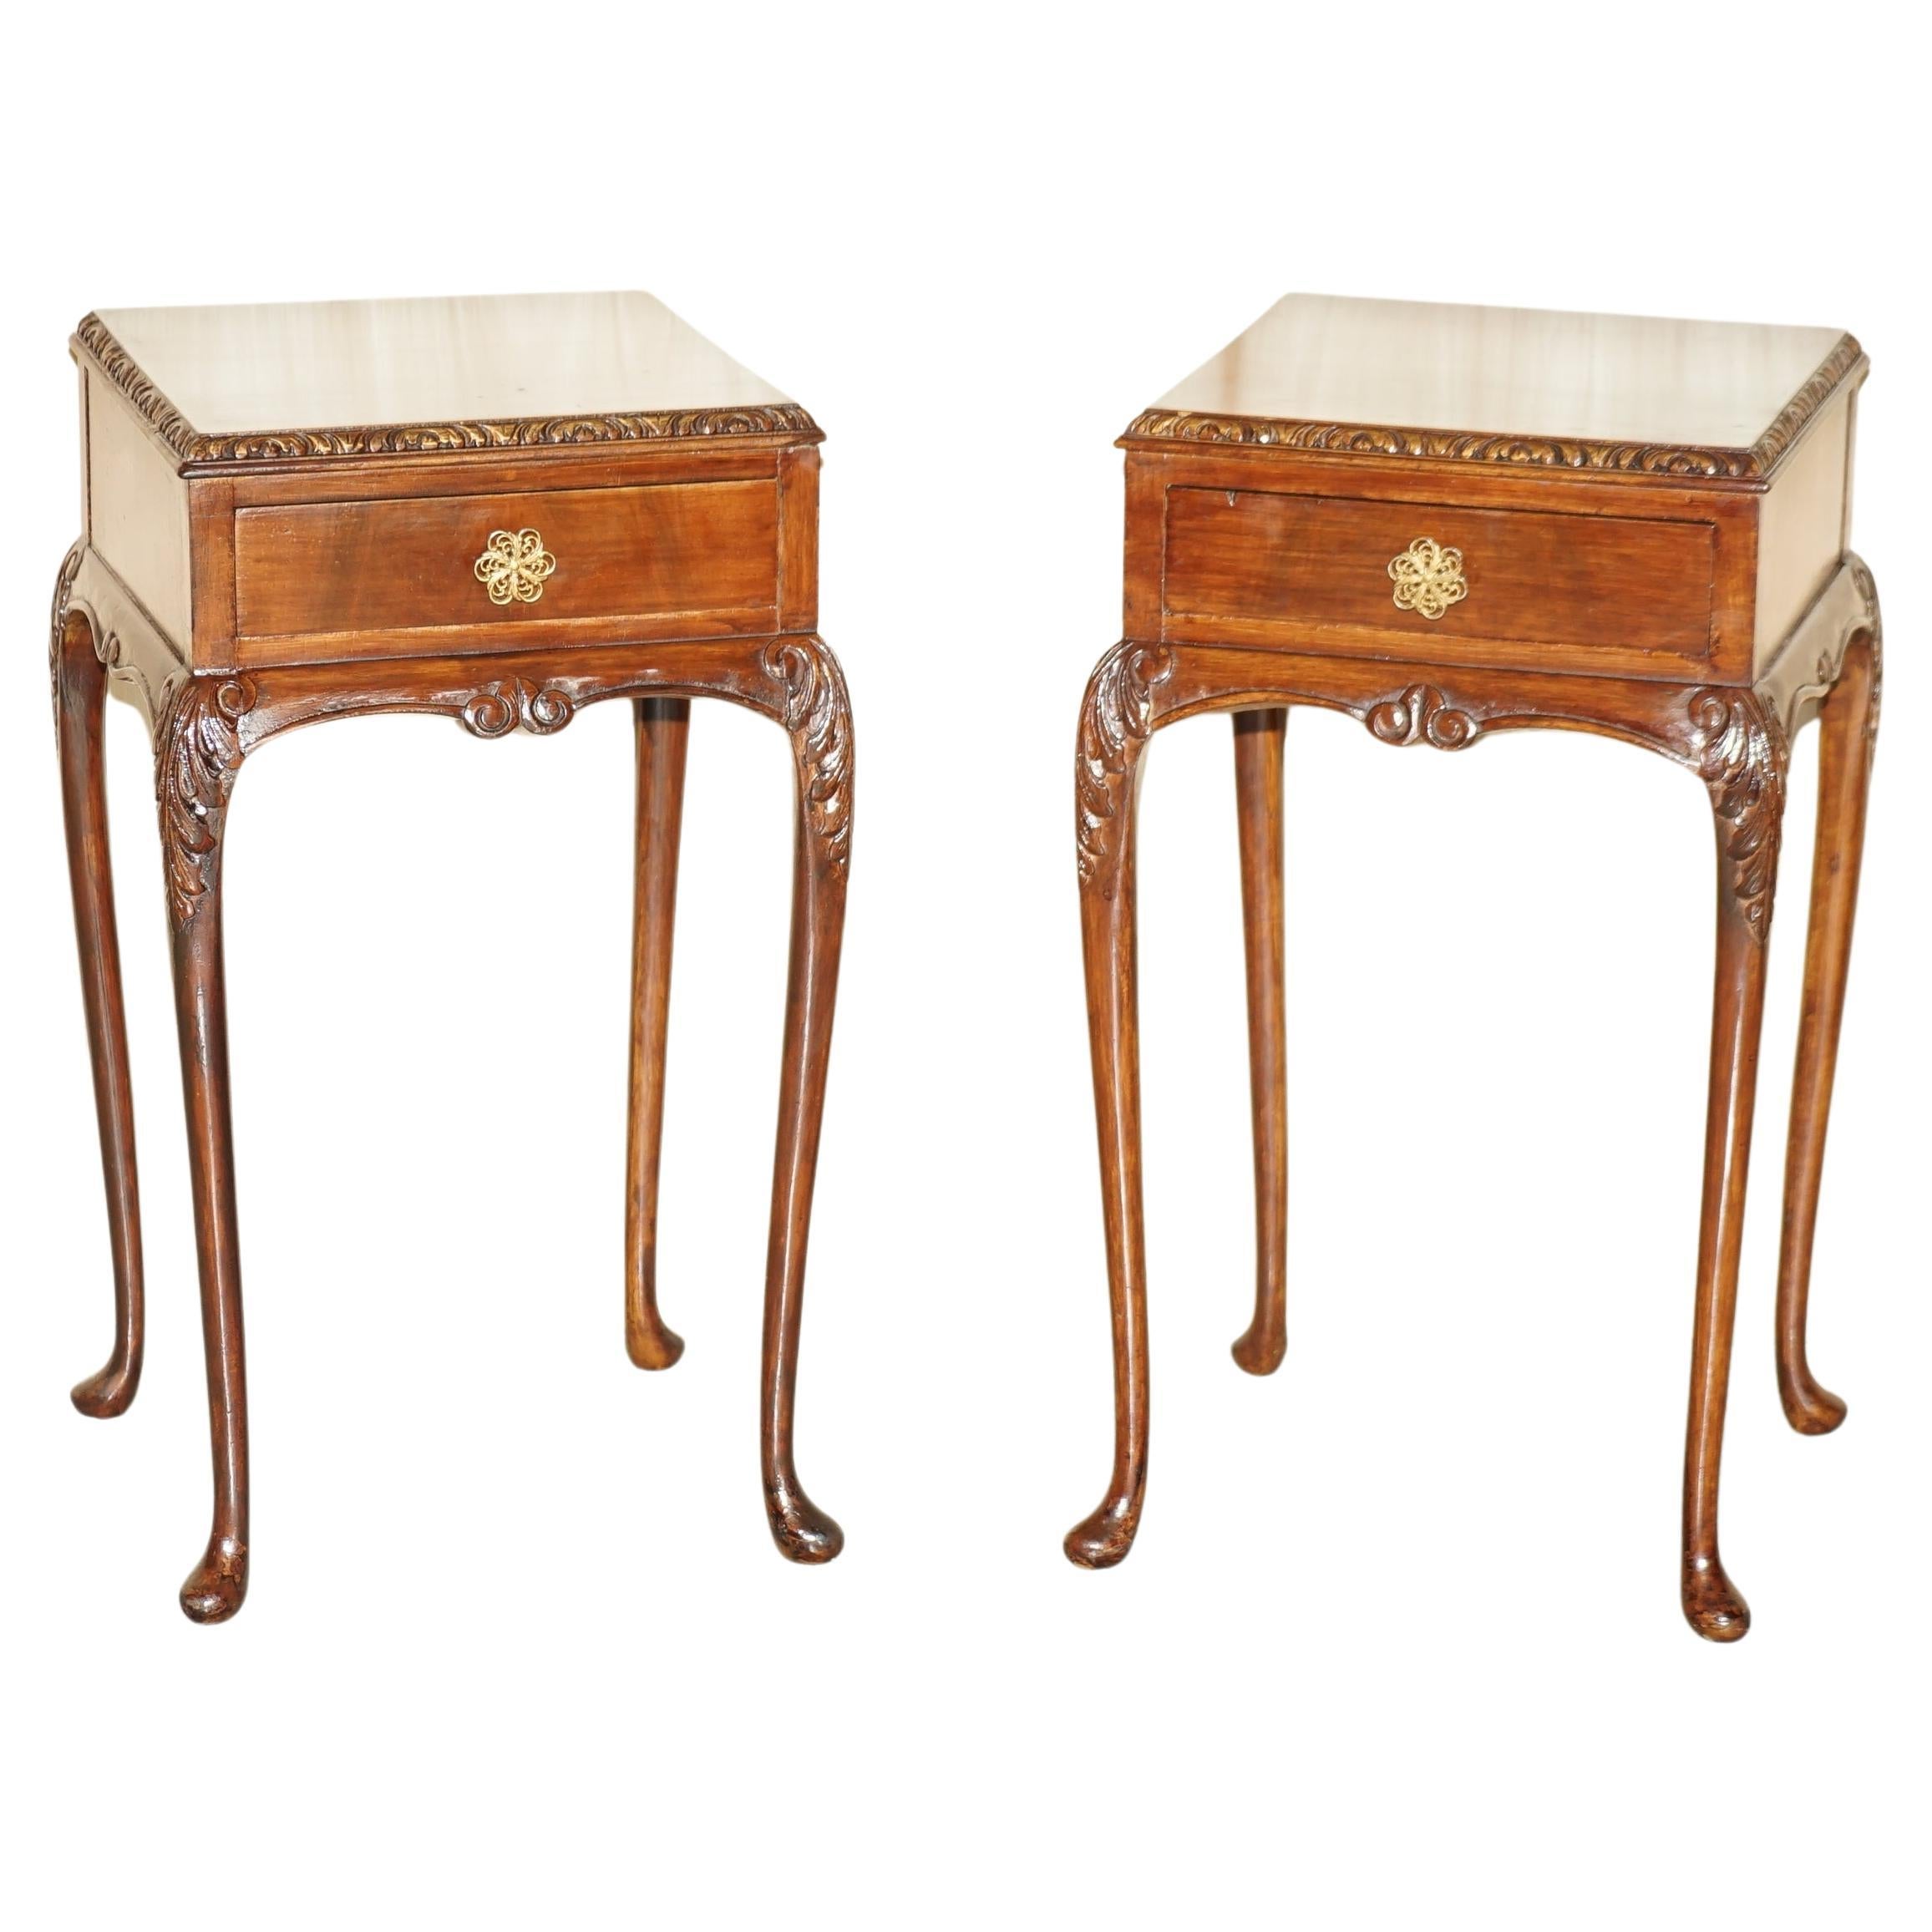 PAIR OF ANTIQUE VICTORIAN ELEGANT CABRIOLE LEGGED SINGLE DRAWER TALL SiDE TABLES